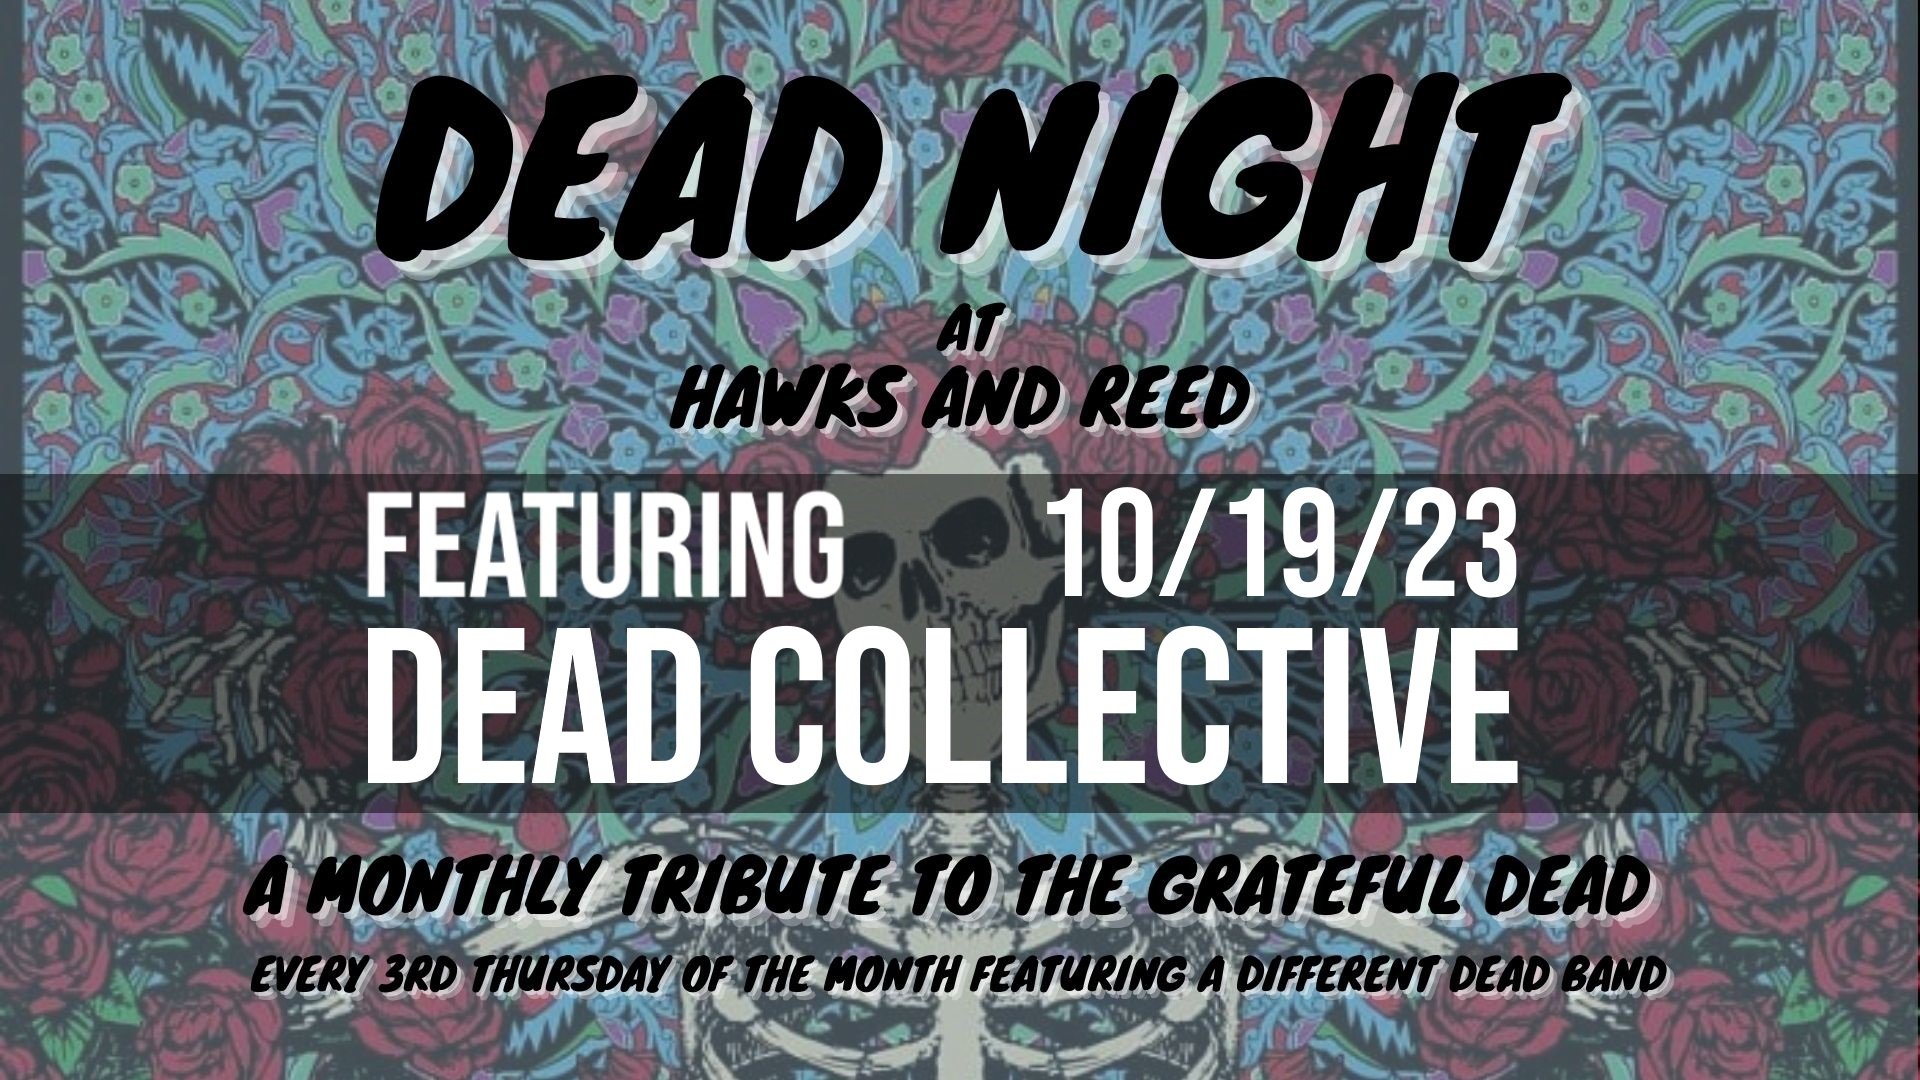 Dead Night Featuring Dead Collective